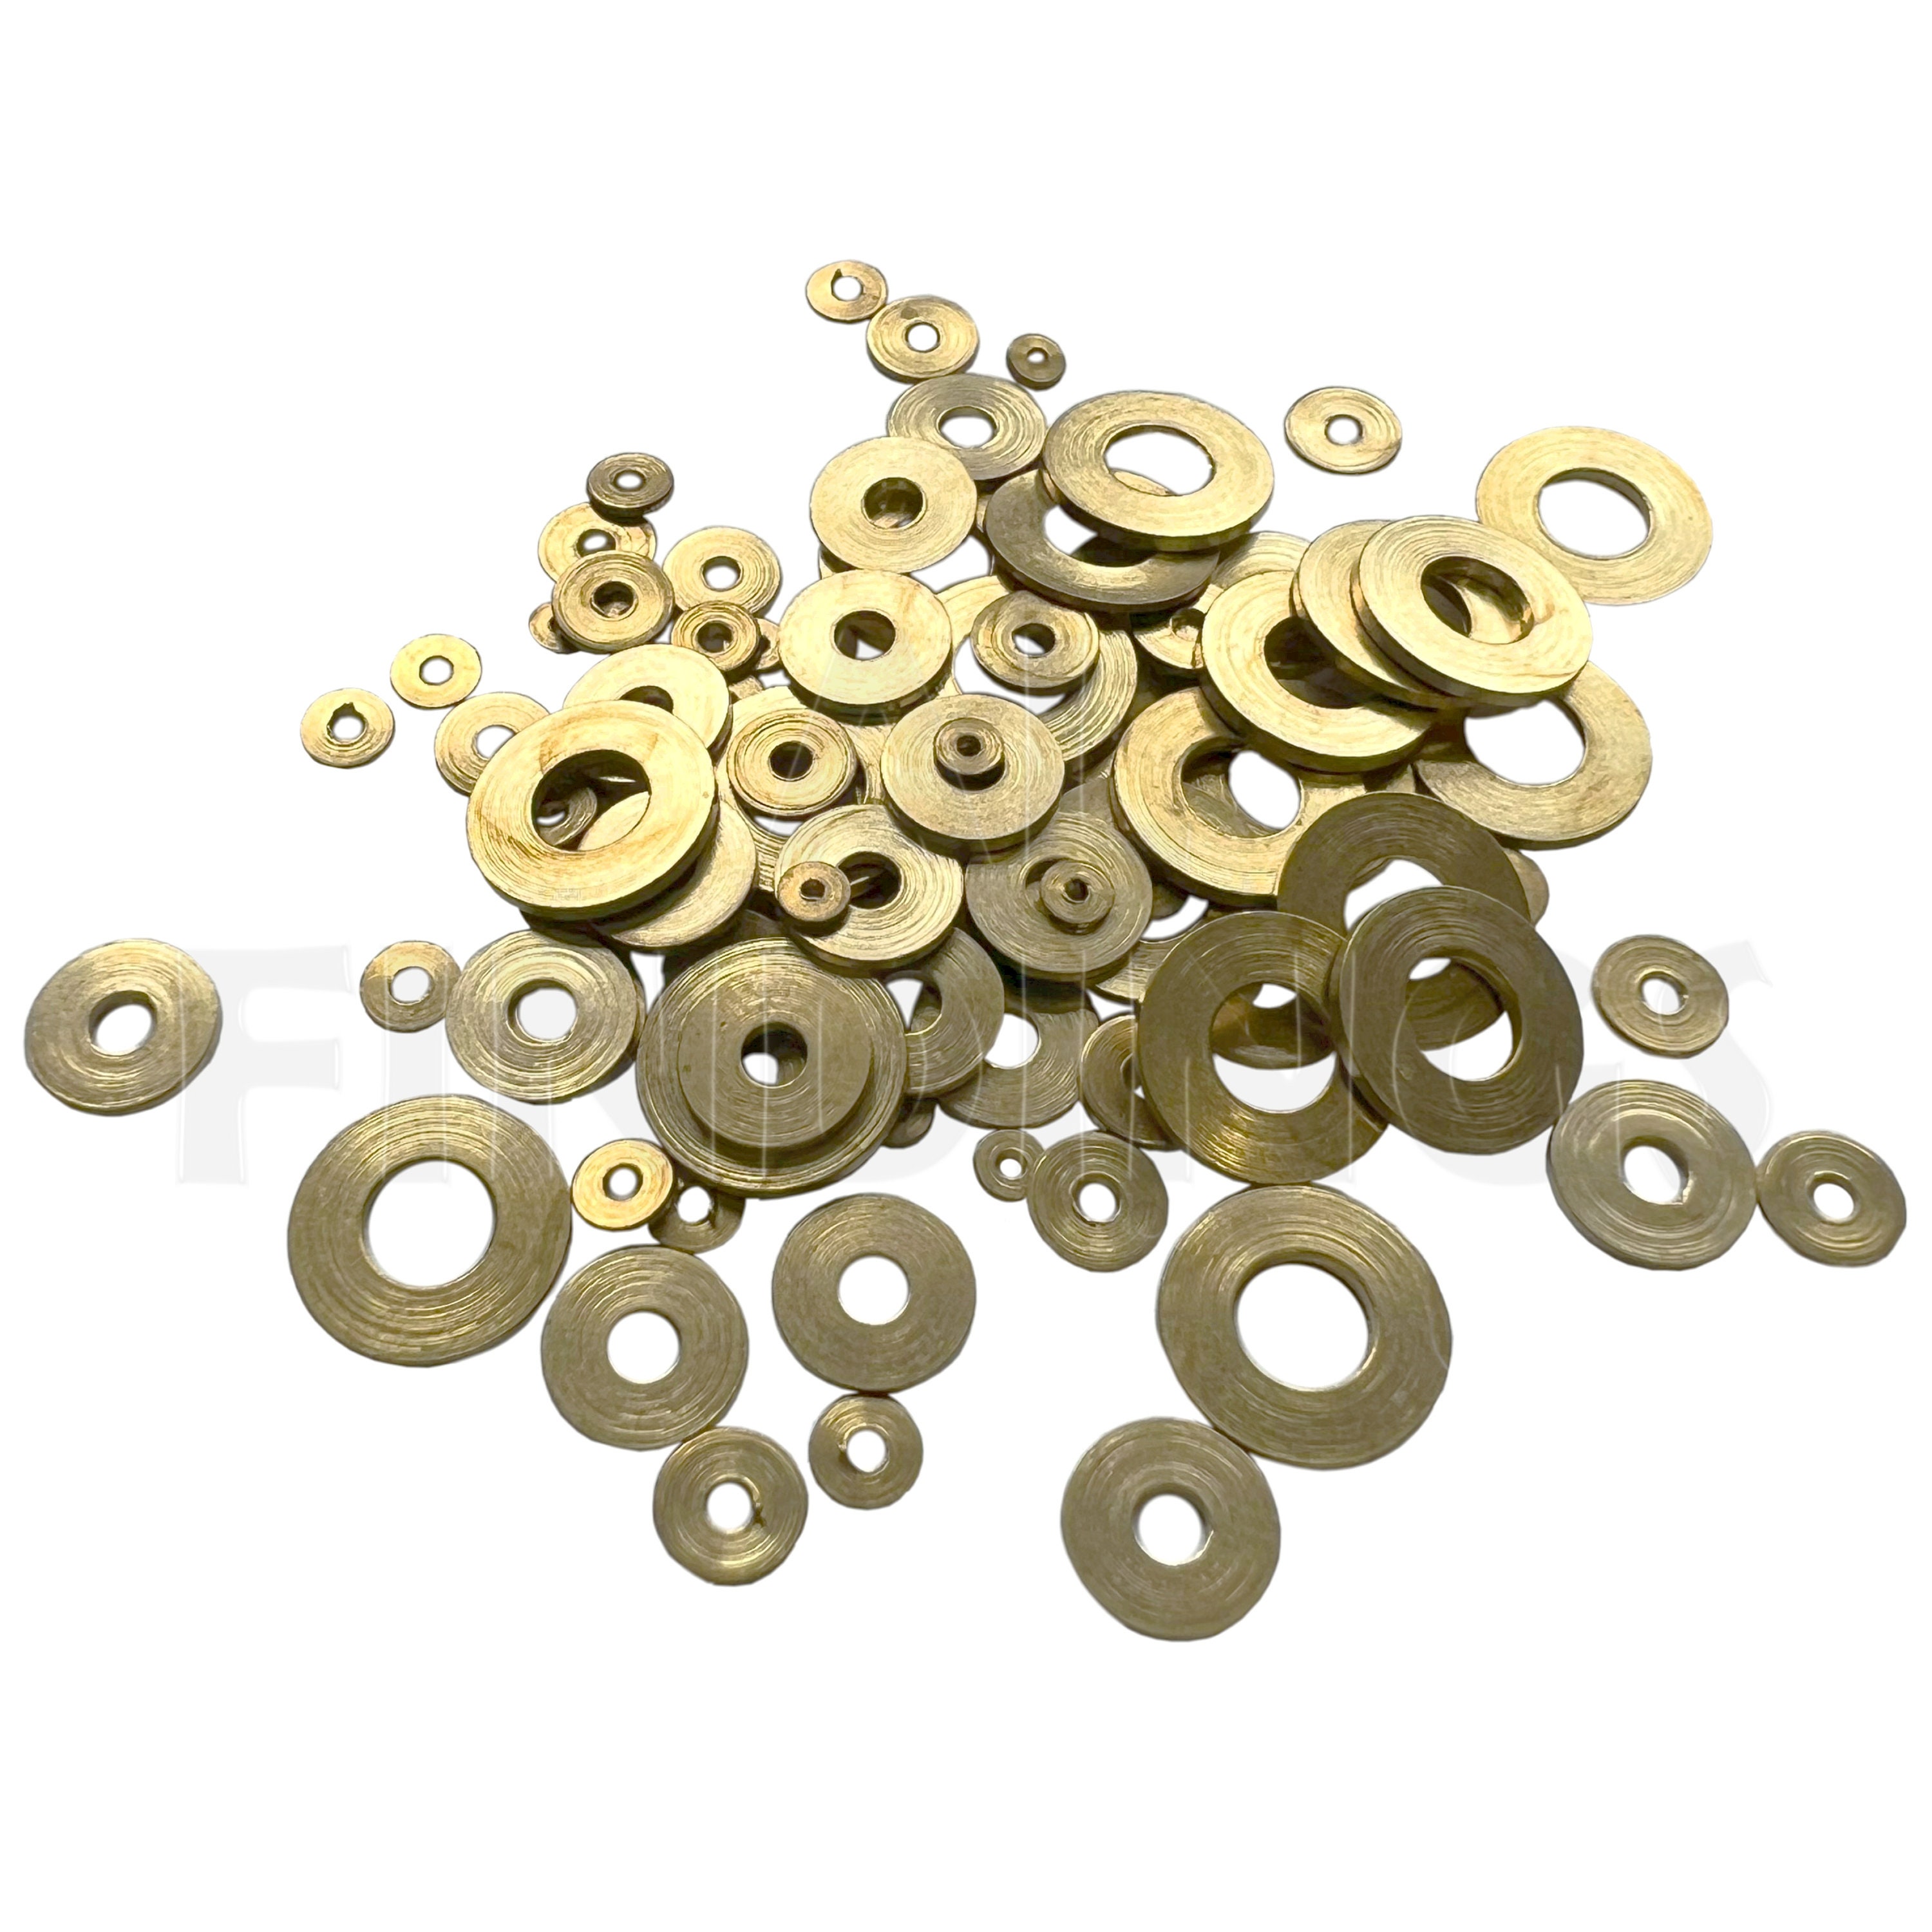 6mm Heishi Washer Bead Spacers, Mykonos Greek Beads, Round Metal Beads,  3.2mm Hole, Jewelry Making Supply, 22k Matte Gold Plated, 15pc 